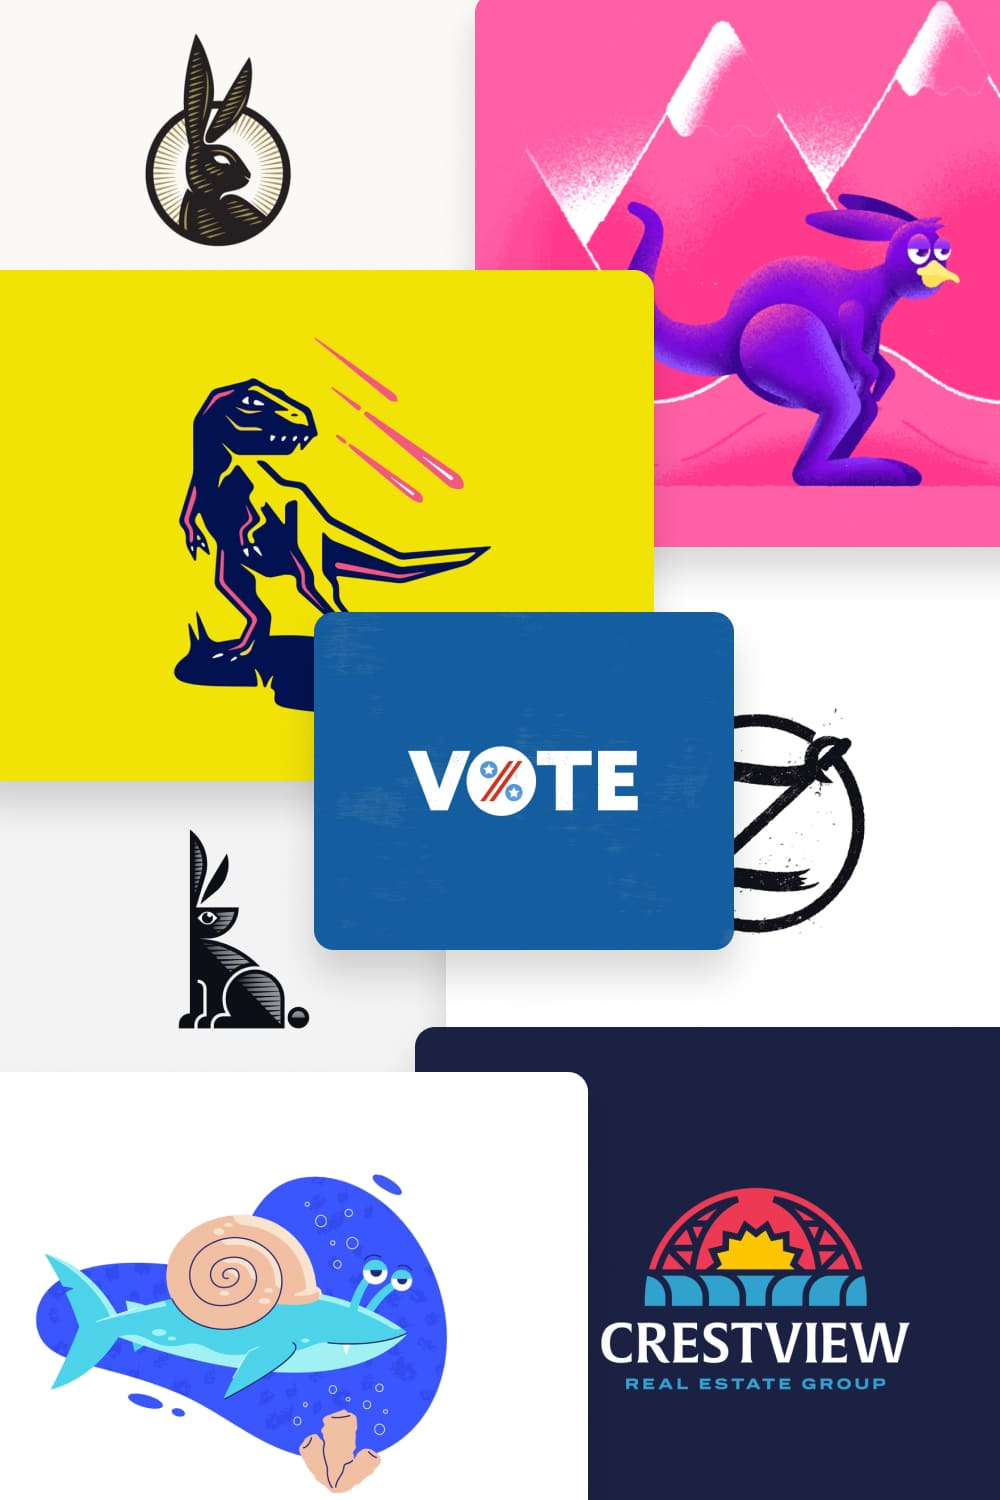 Vibrant creative illustrations that can be a cool addition to your logo or standalone image.